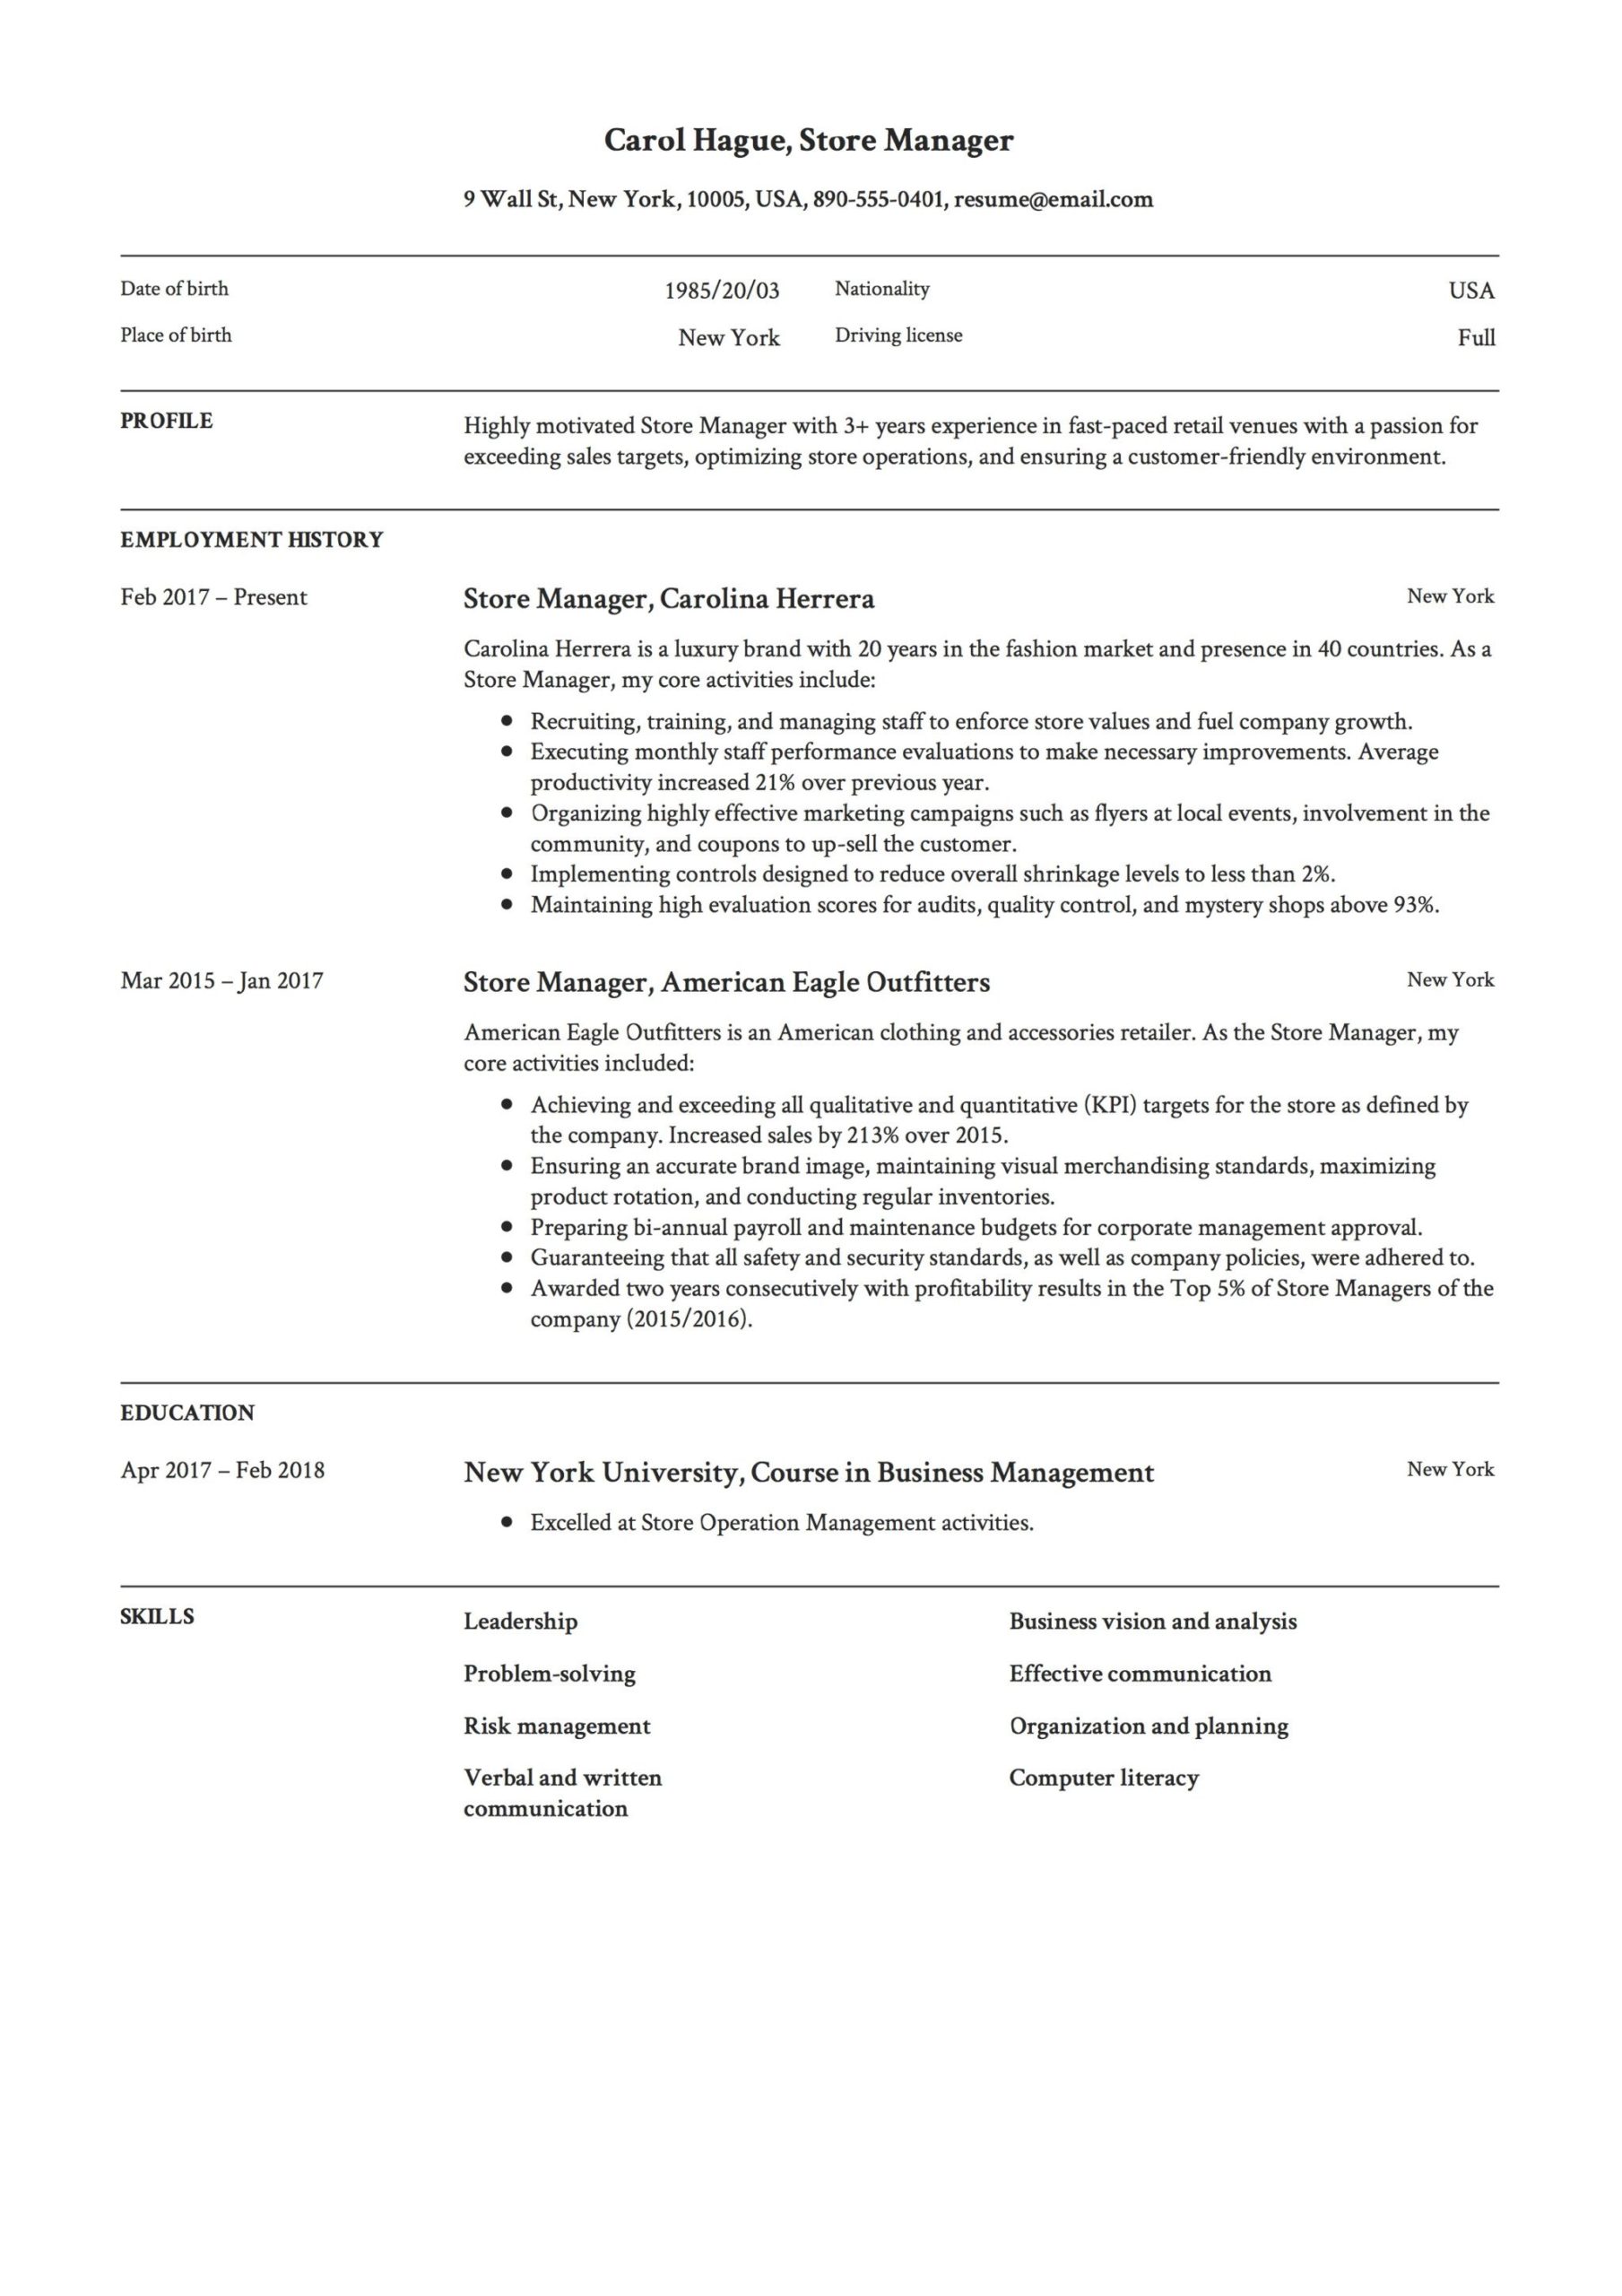 Sample Resumes for Retail District Manager Store Manager Resume & Guide 12 Templates Pdf 2021